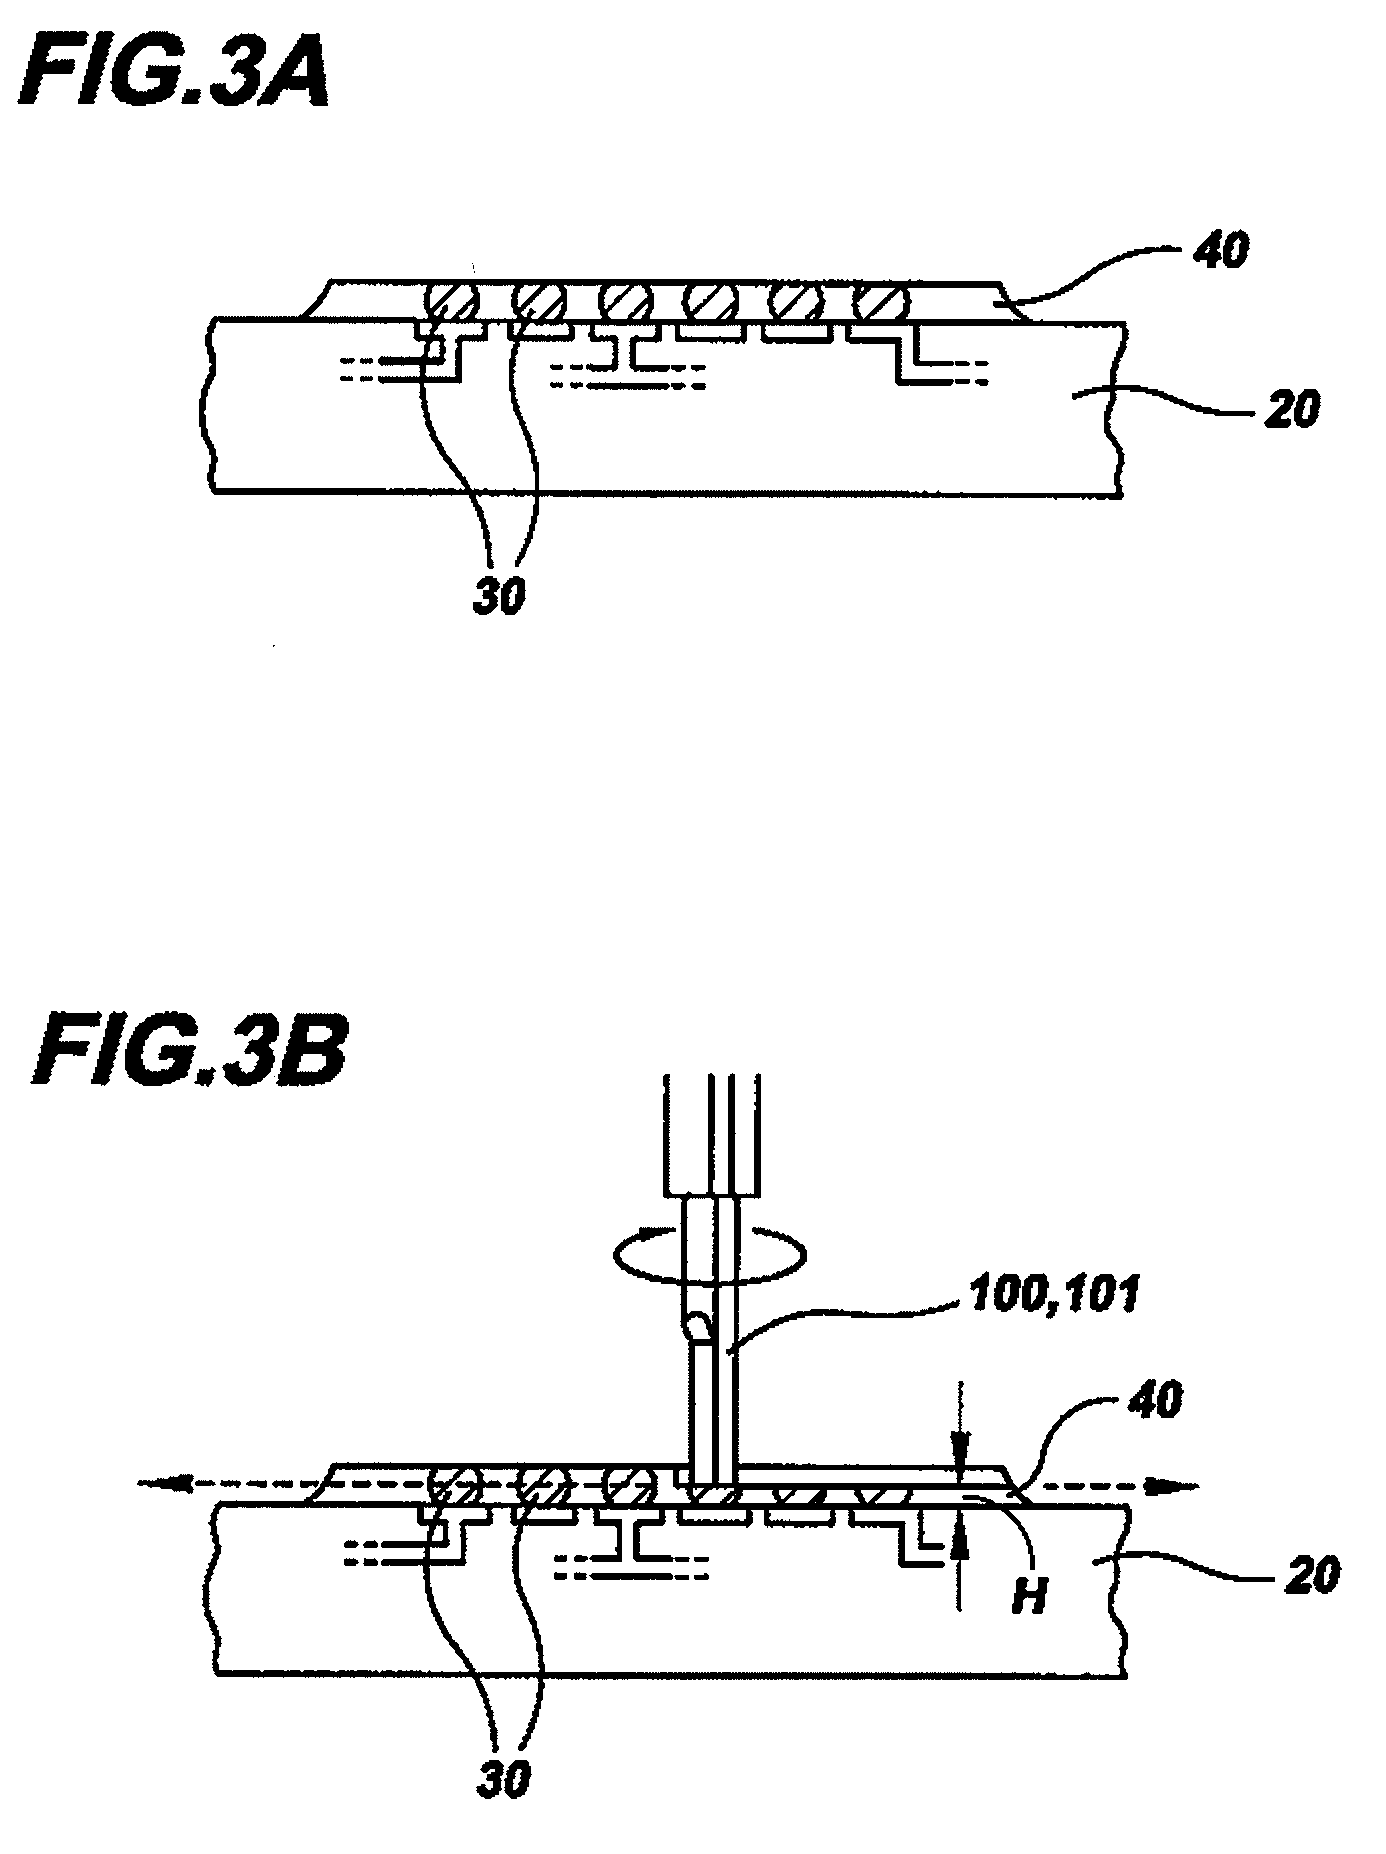 Method to recover underfilled modules by selective removal of discrete components